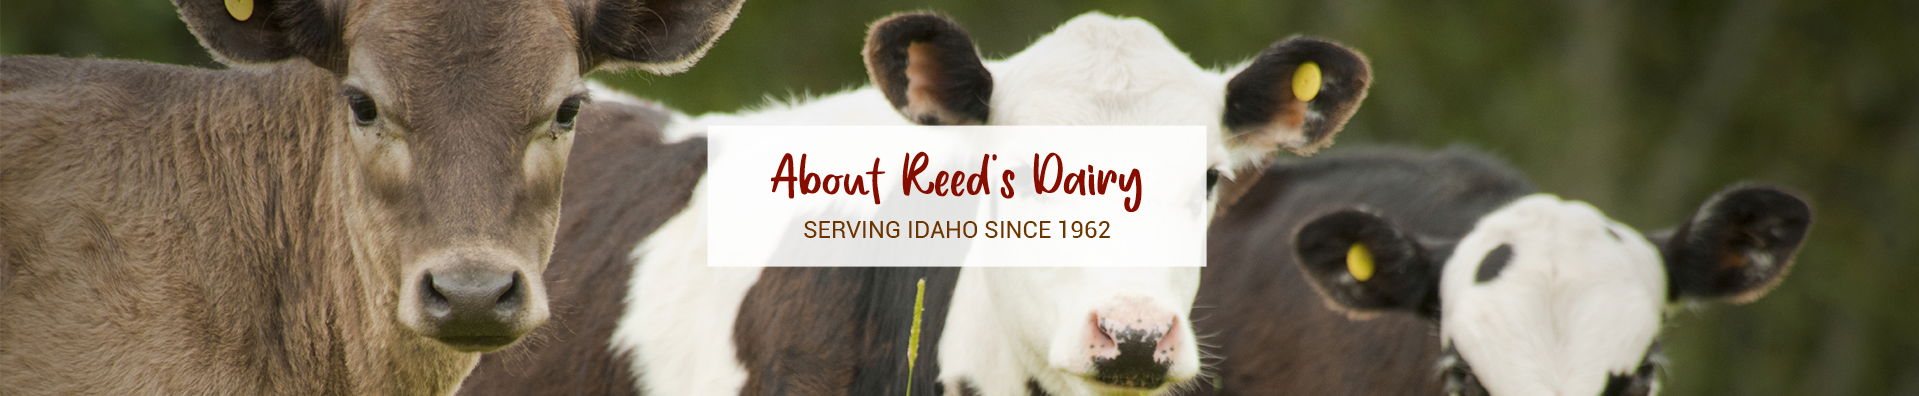 About Reed's Dairy